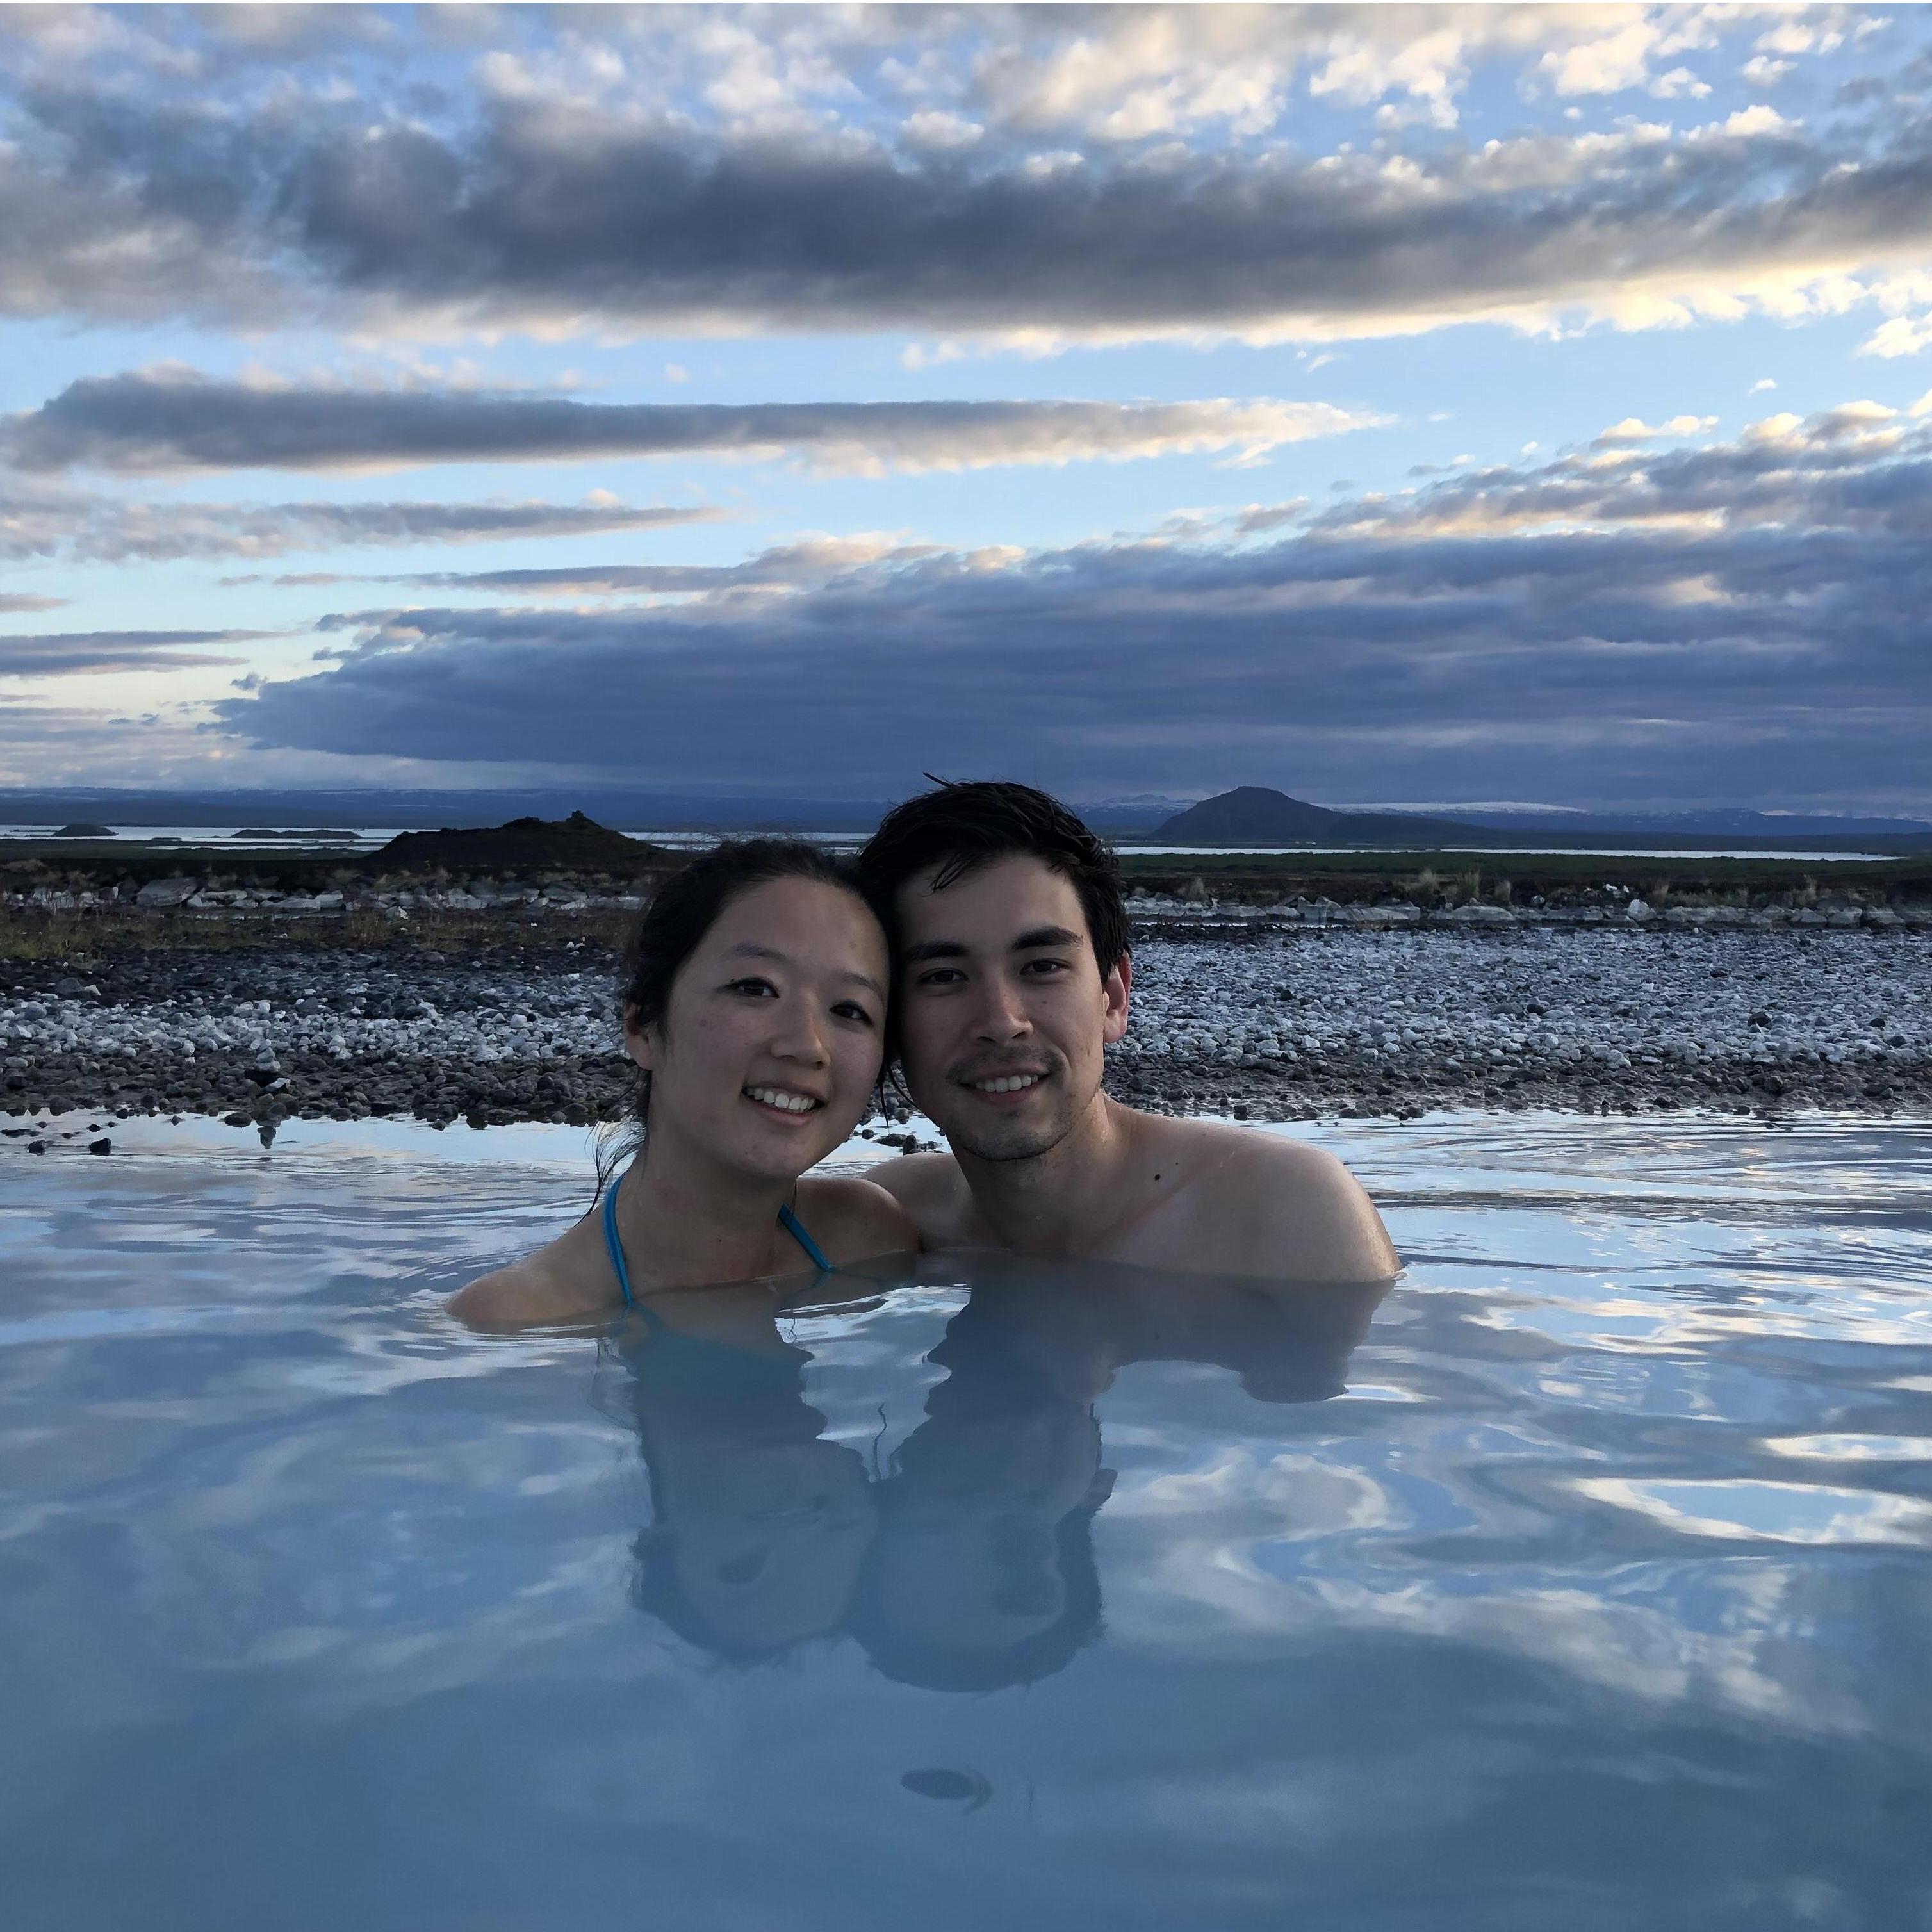 Relaxing in the Myvatn natural hot springs (Iceland, June 2019)